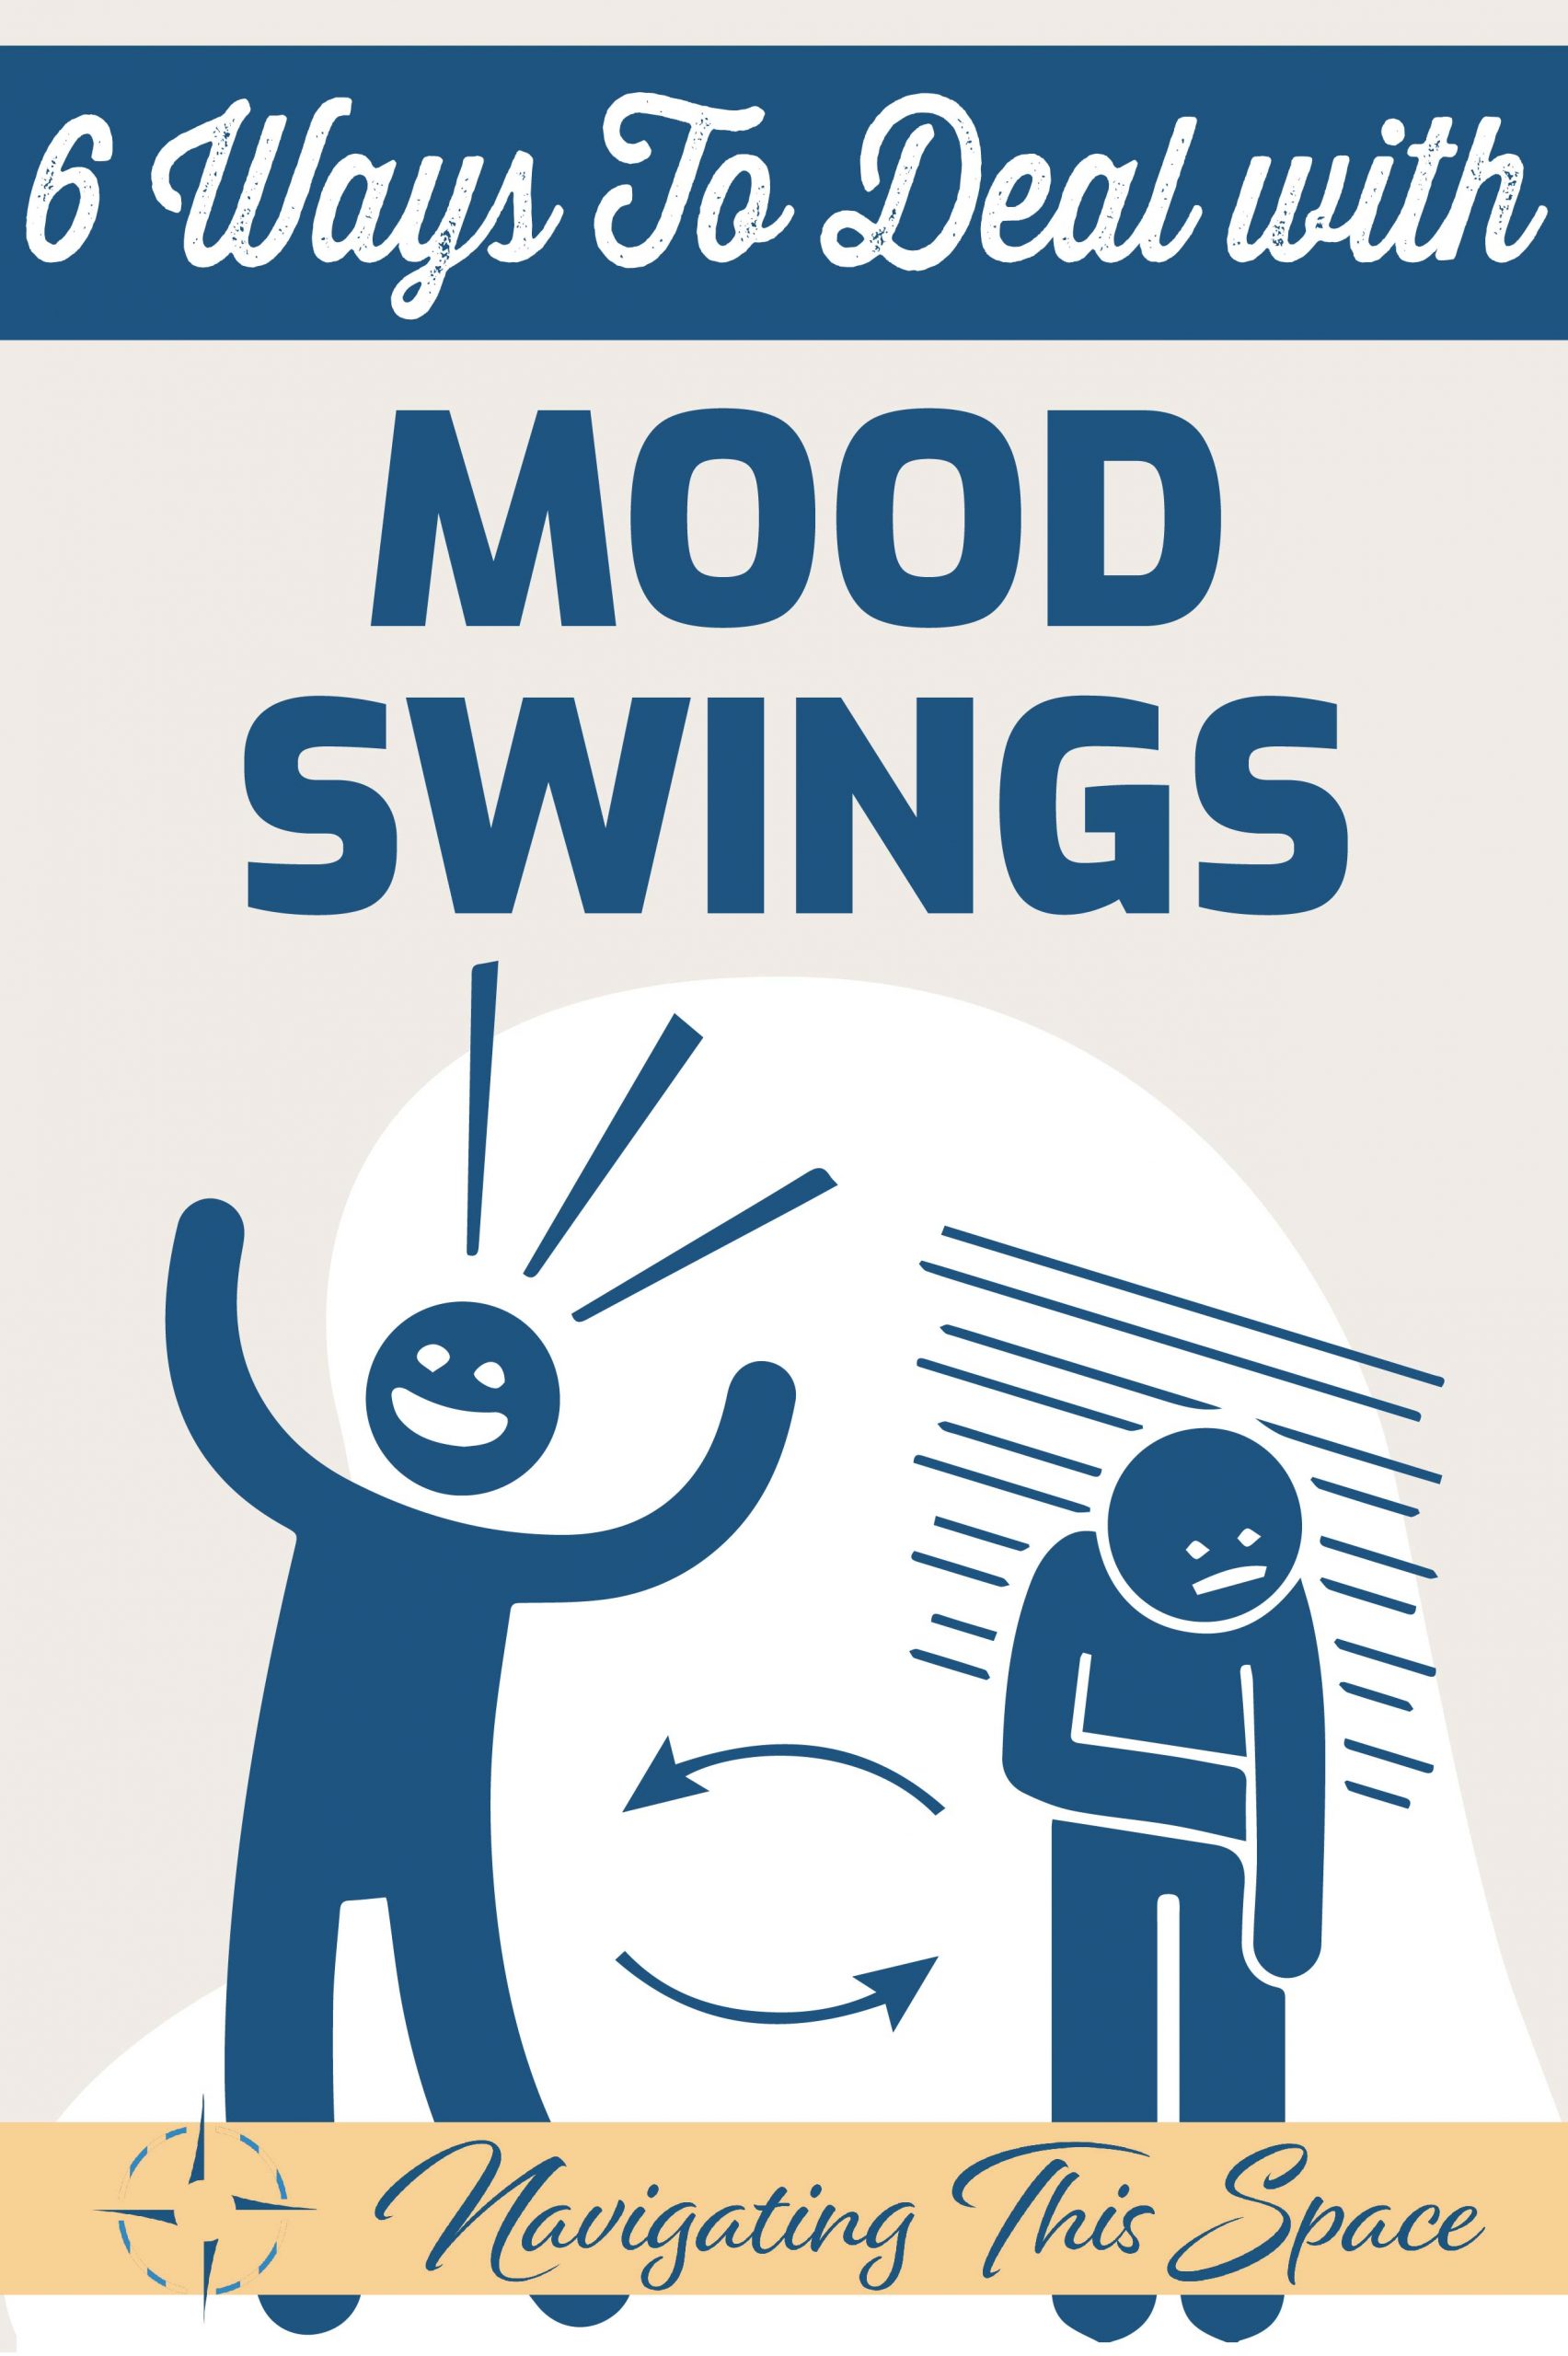 6 Ways to deal with mood swings